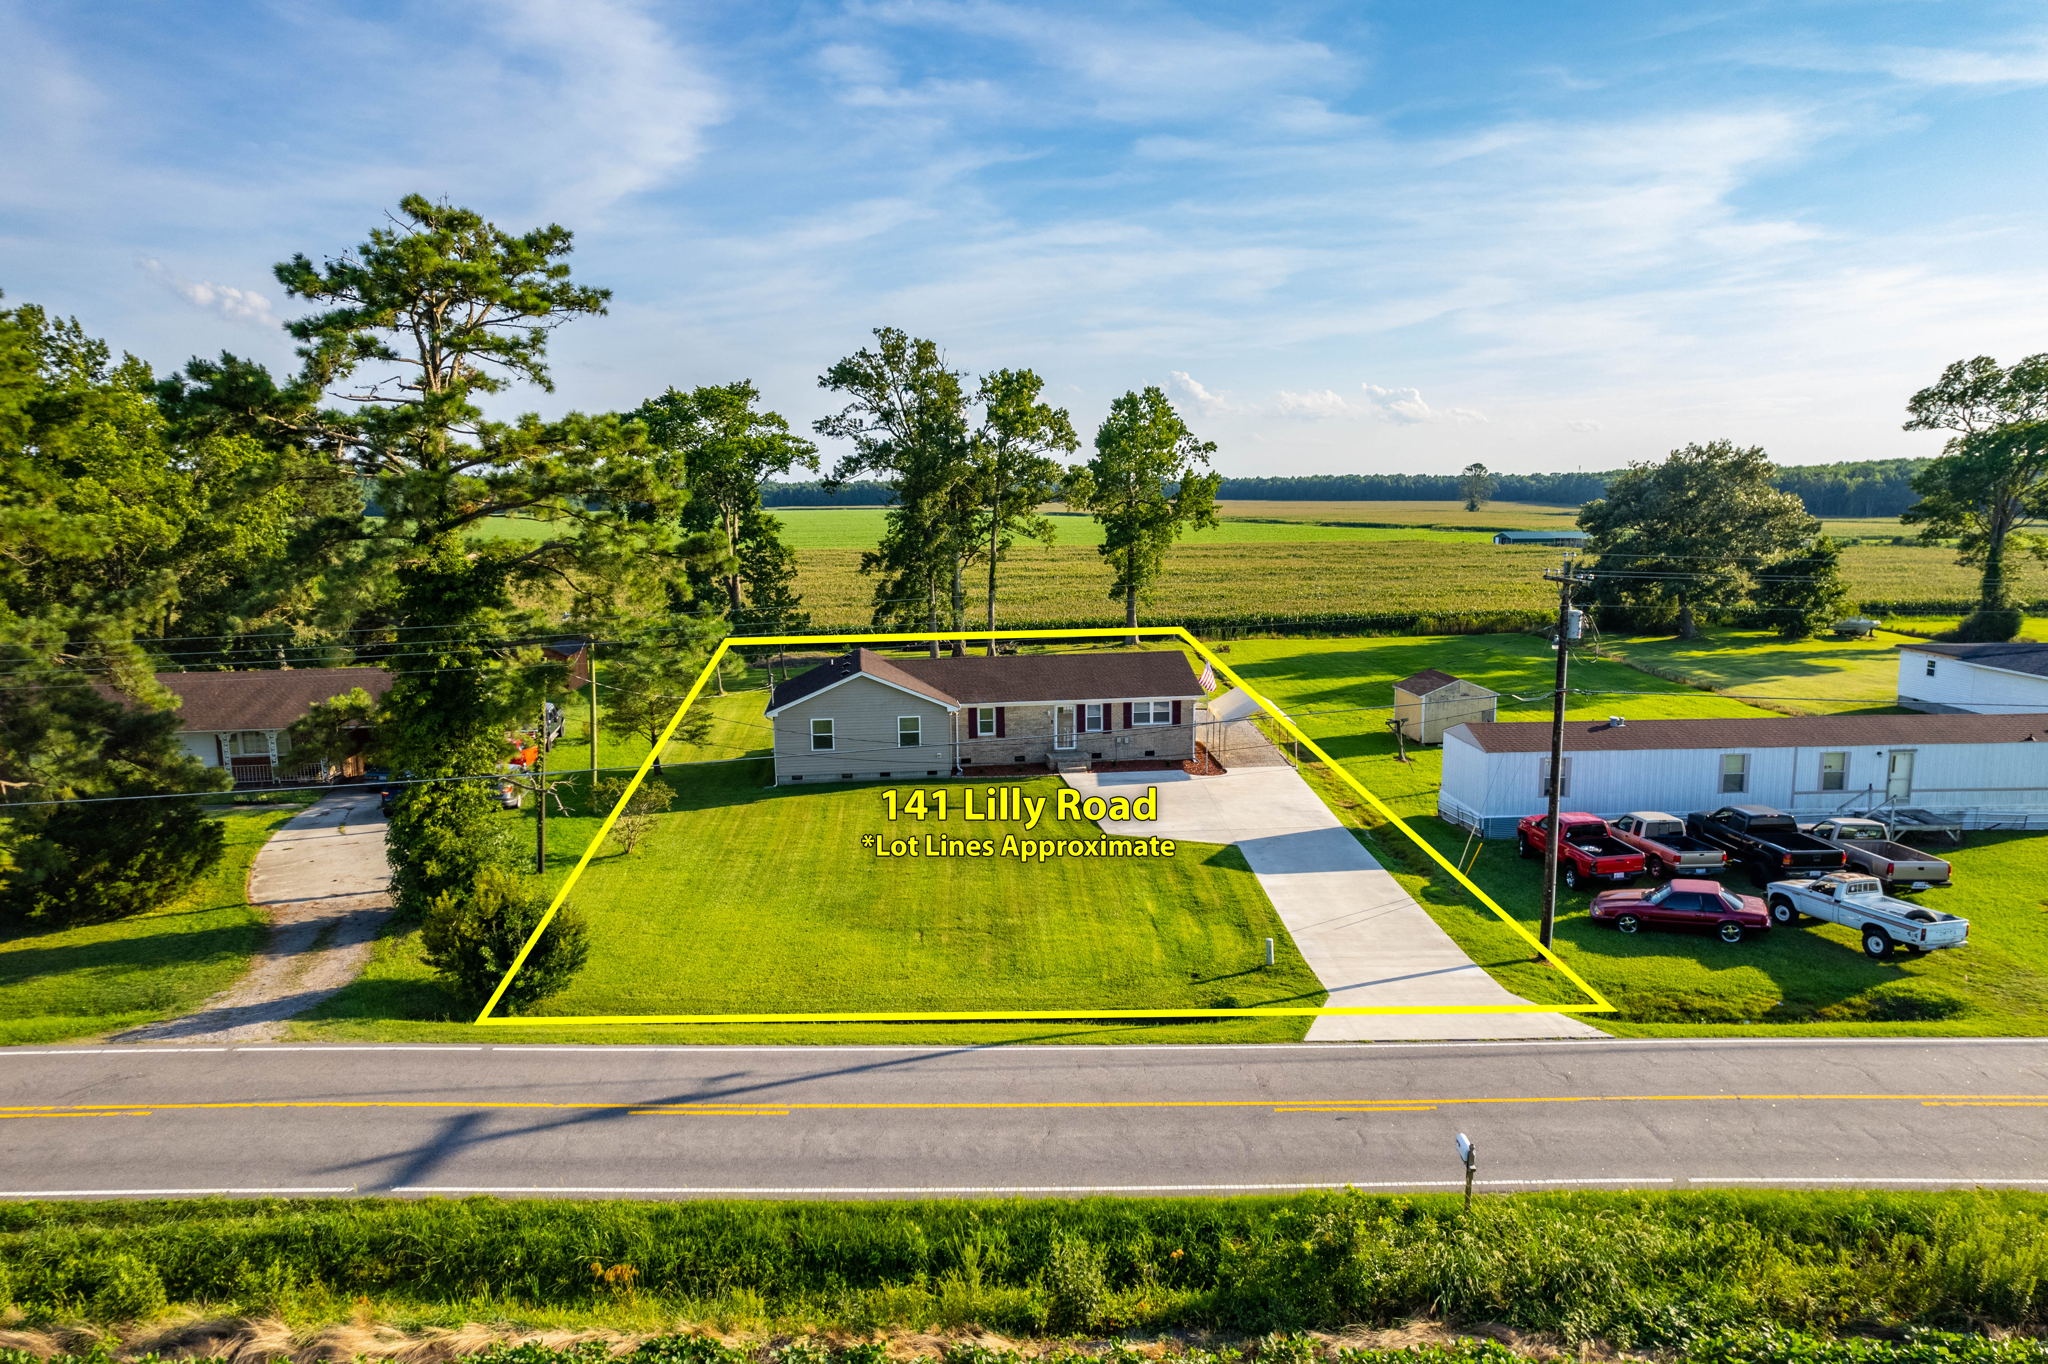 141 Lilly Rd | Aerial Front | Lot Lines